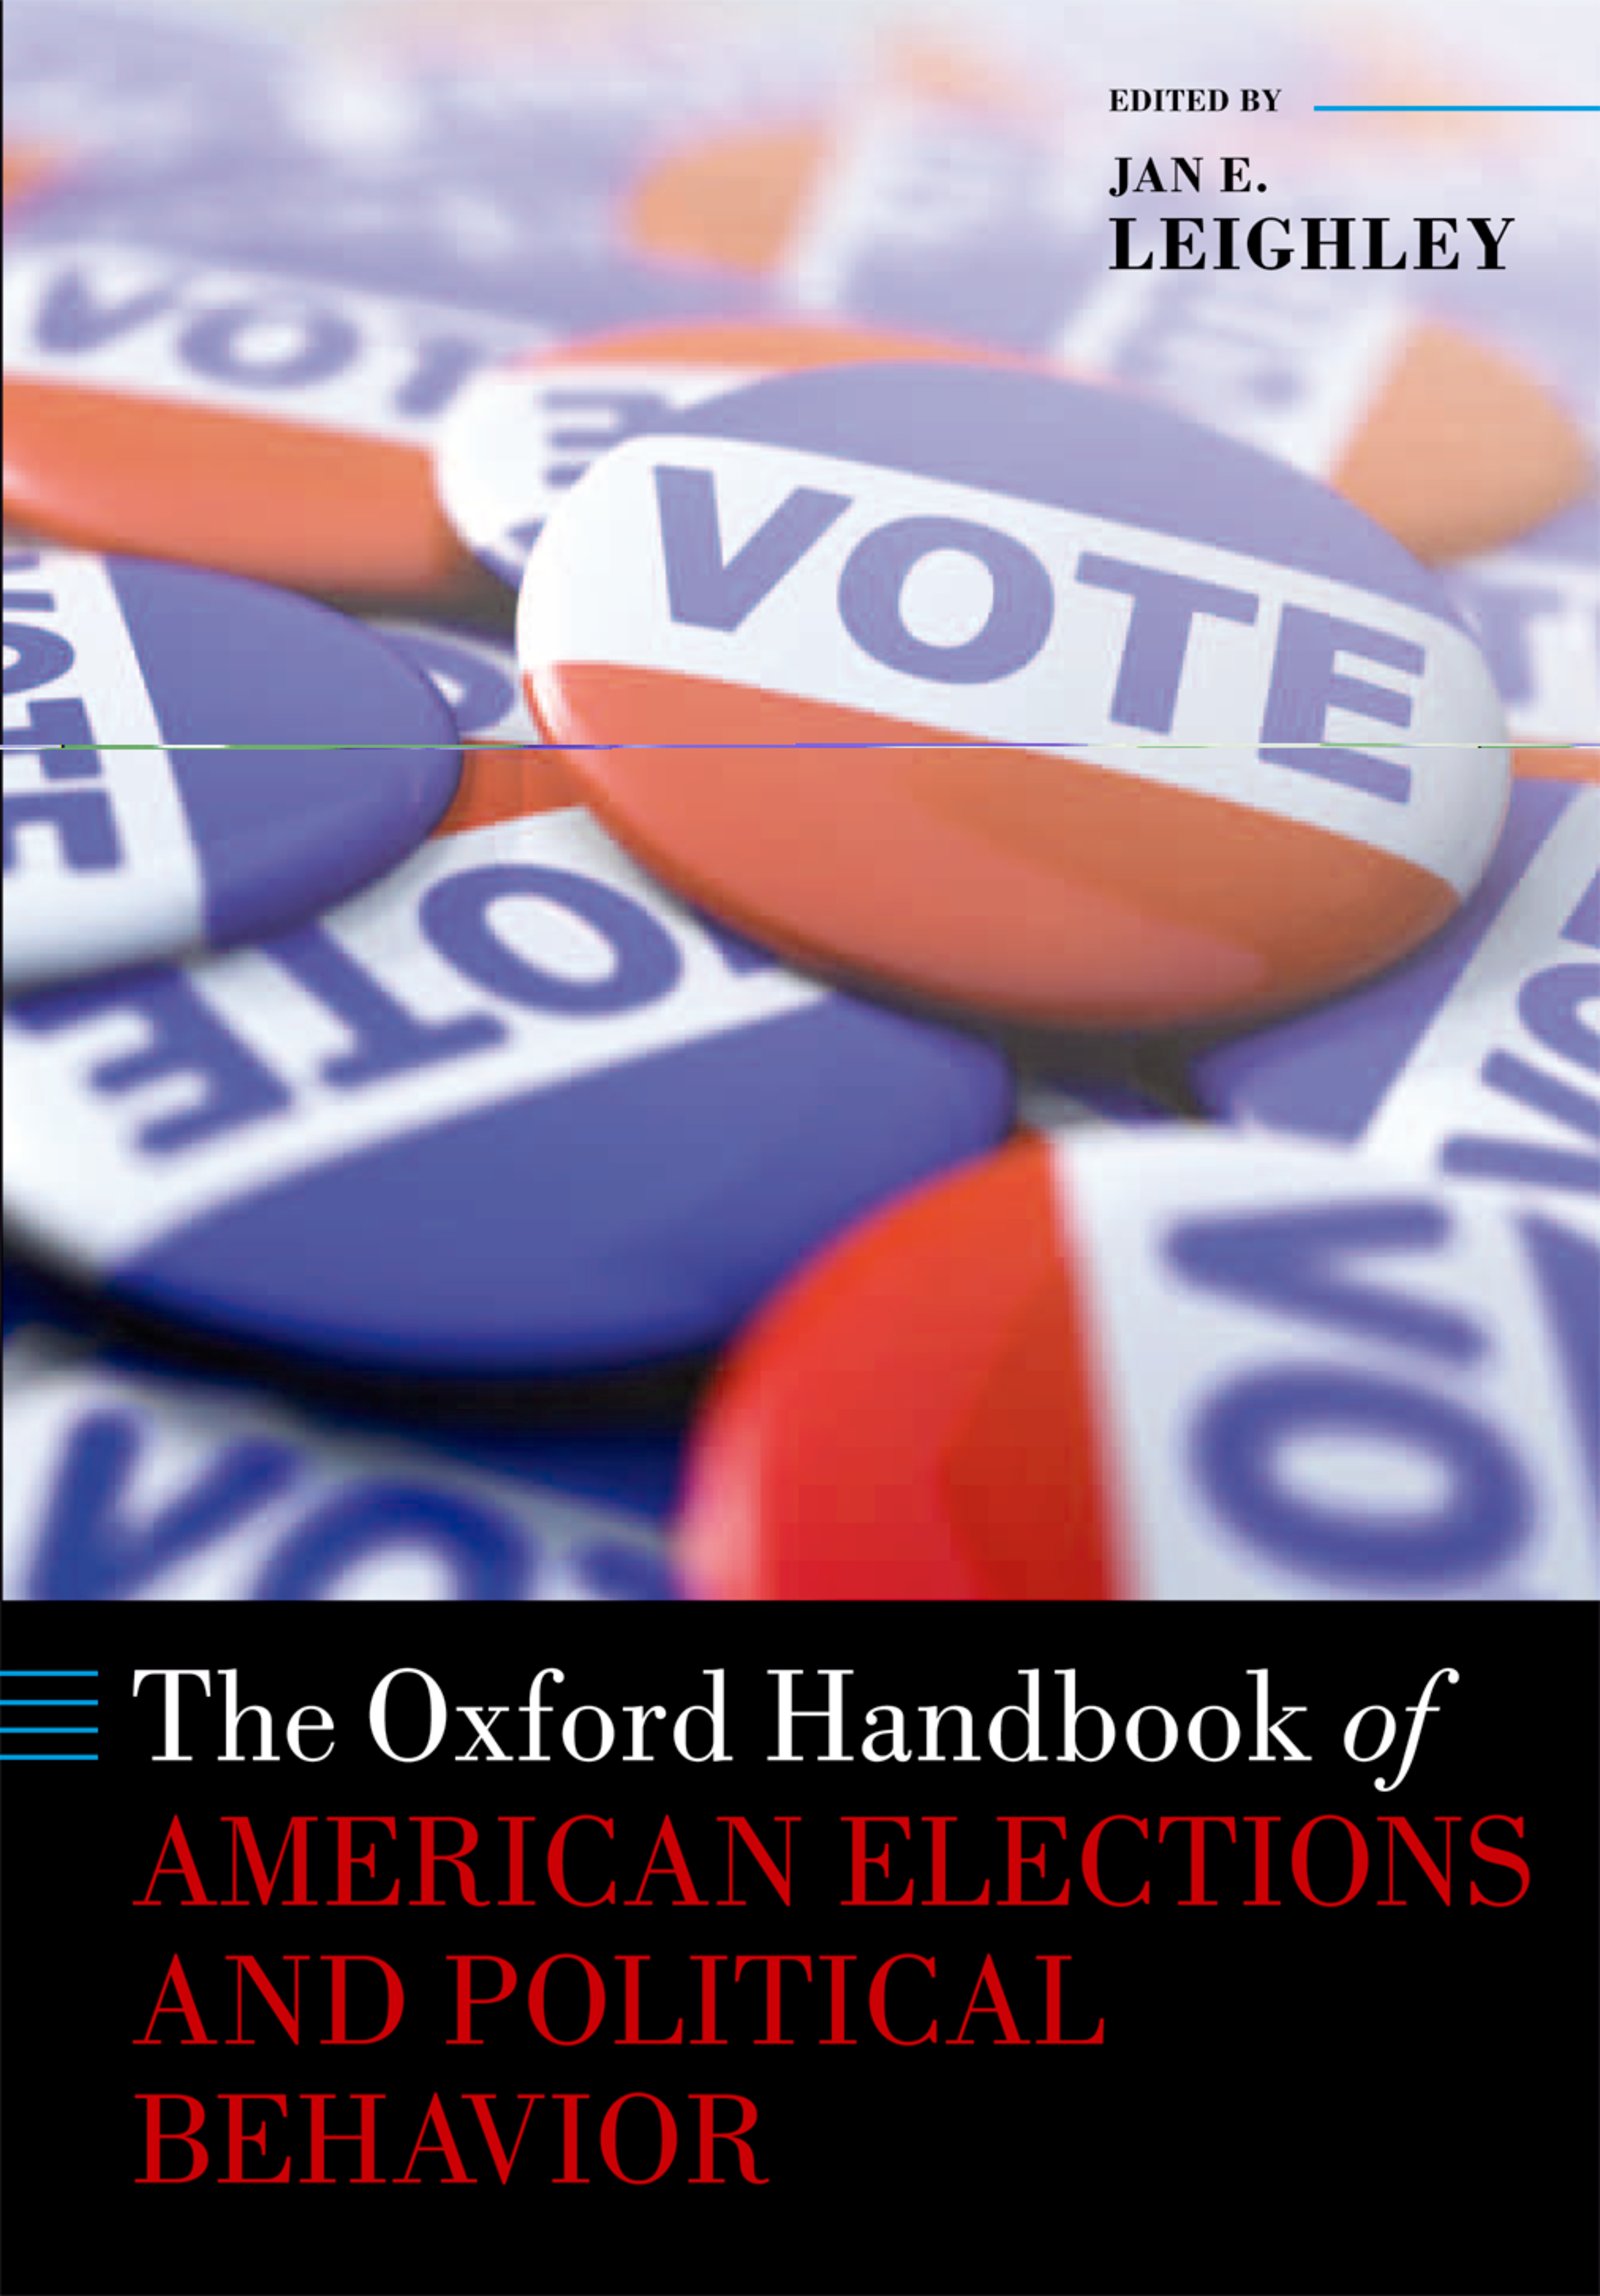 The Oxford Handbook of American Elections and Political Behavior - 25-49.99